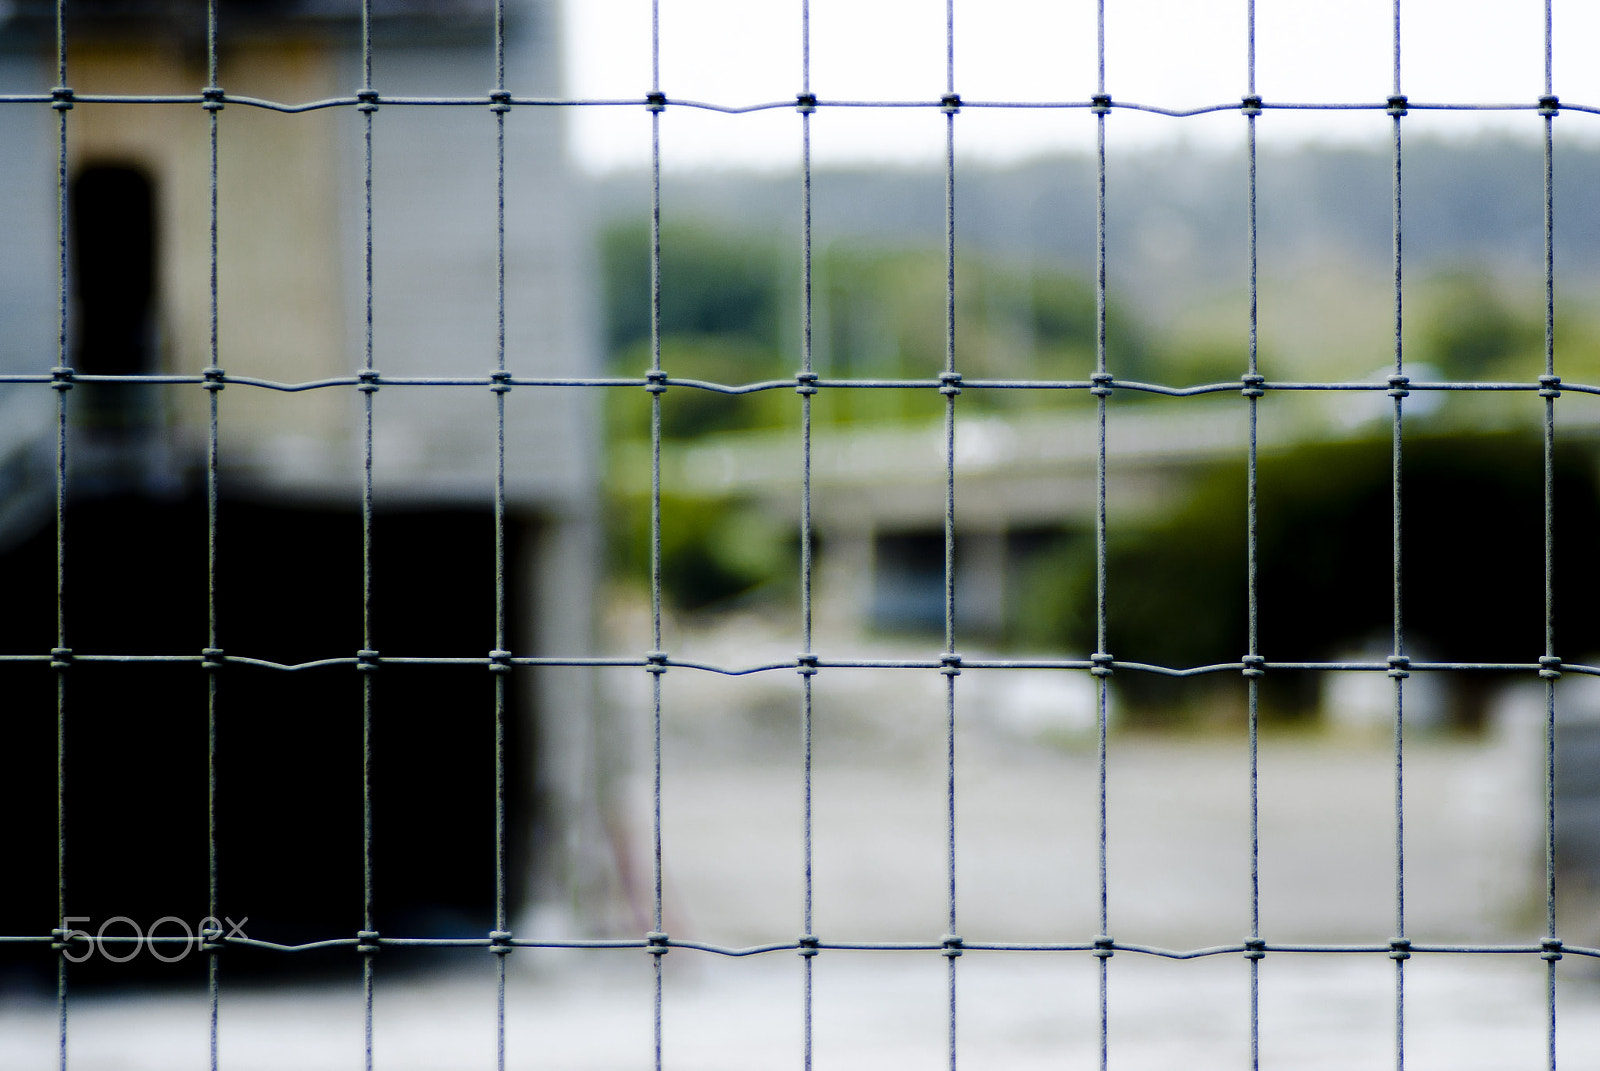 Cosina AF 100-300mm F5.6-6.7 sample photo. Behind the wire photography